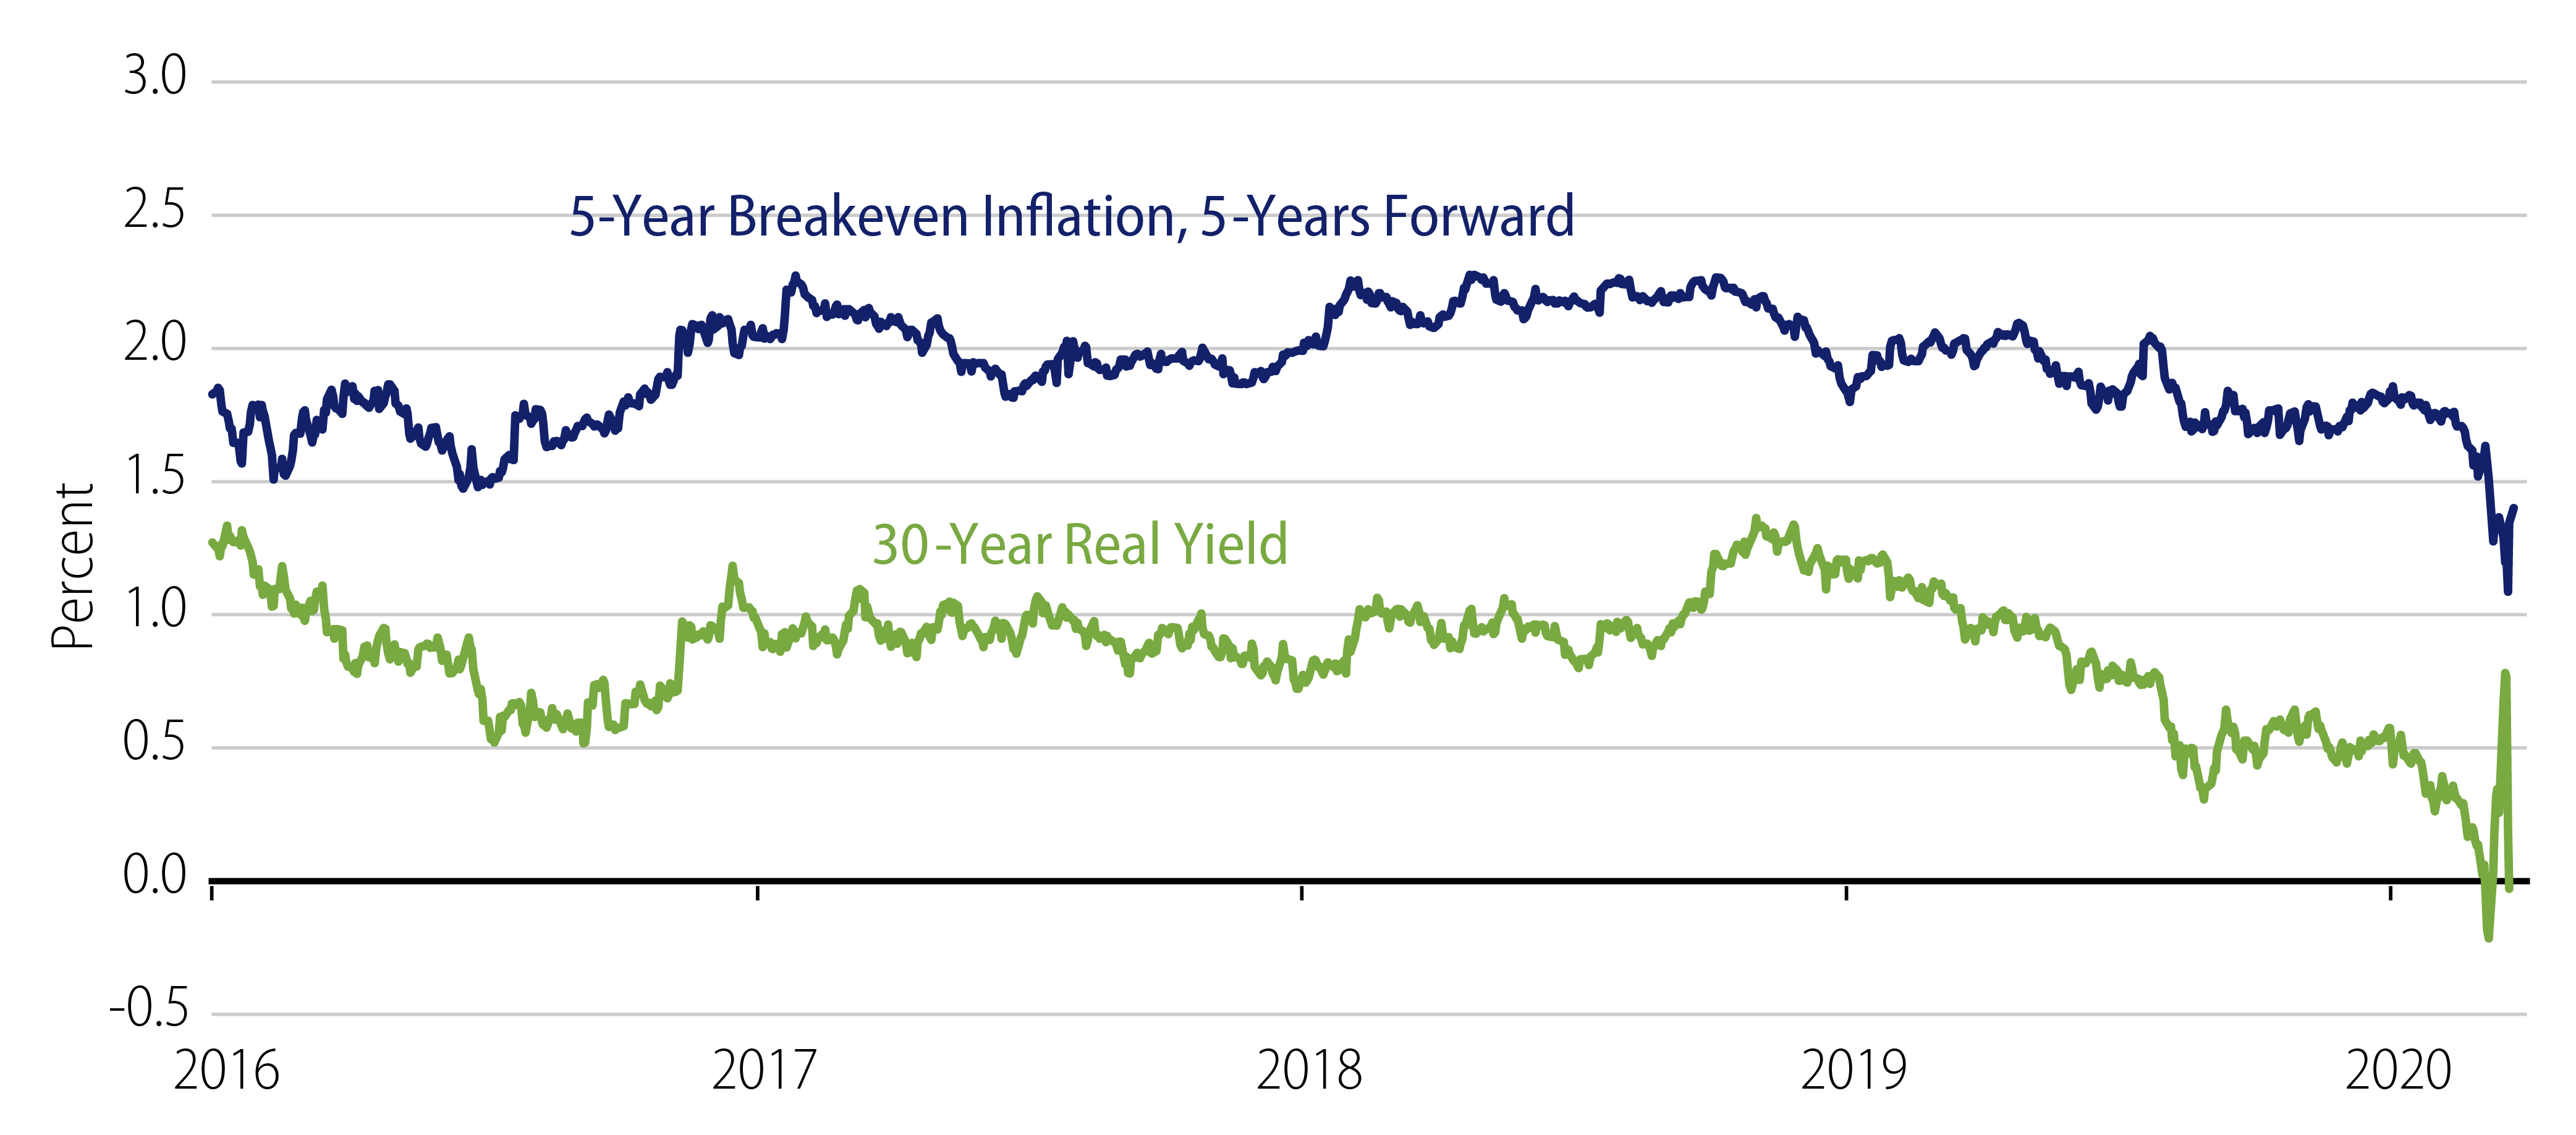 Explore Future 5-Year Breakeven Inflation vs. 30-Year Real Yields